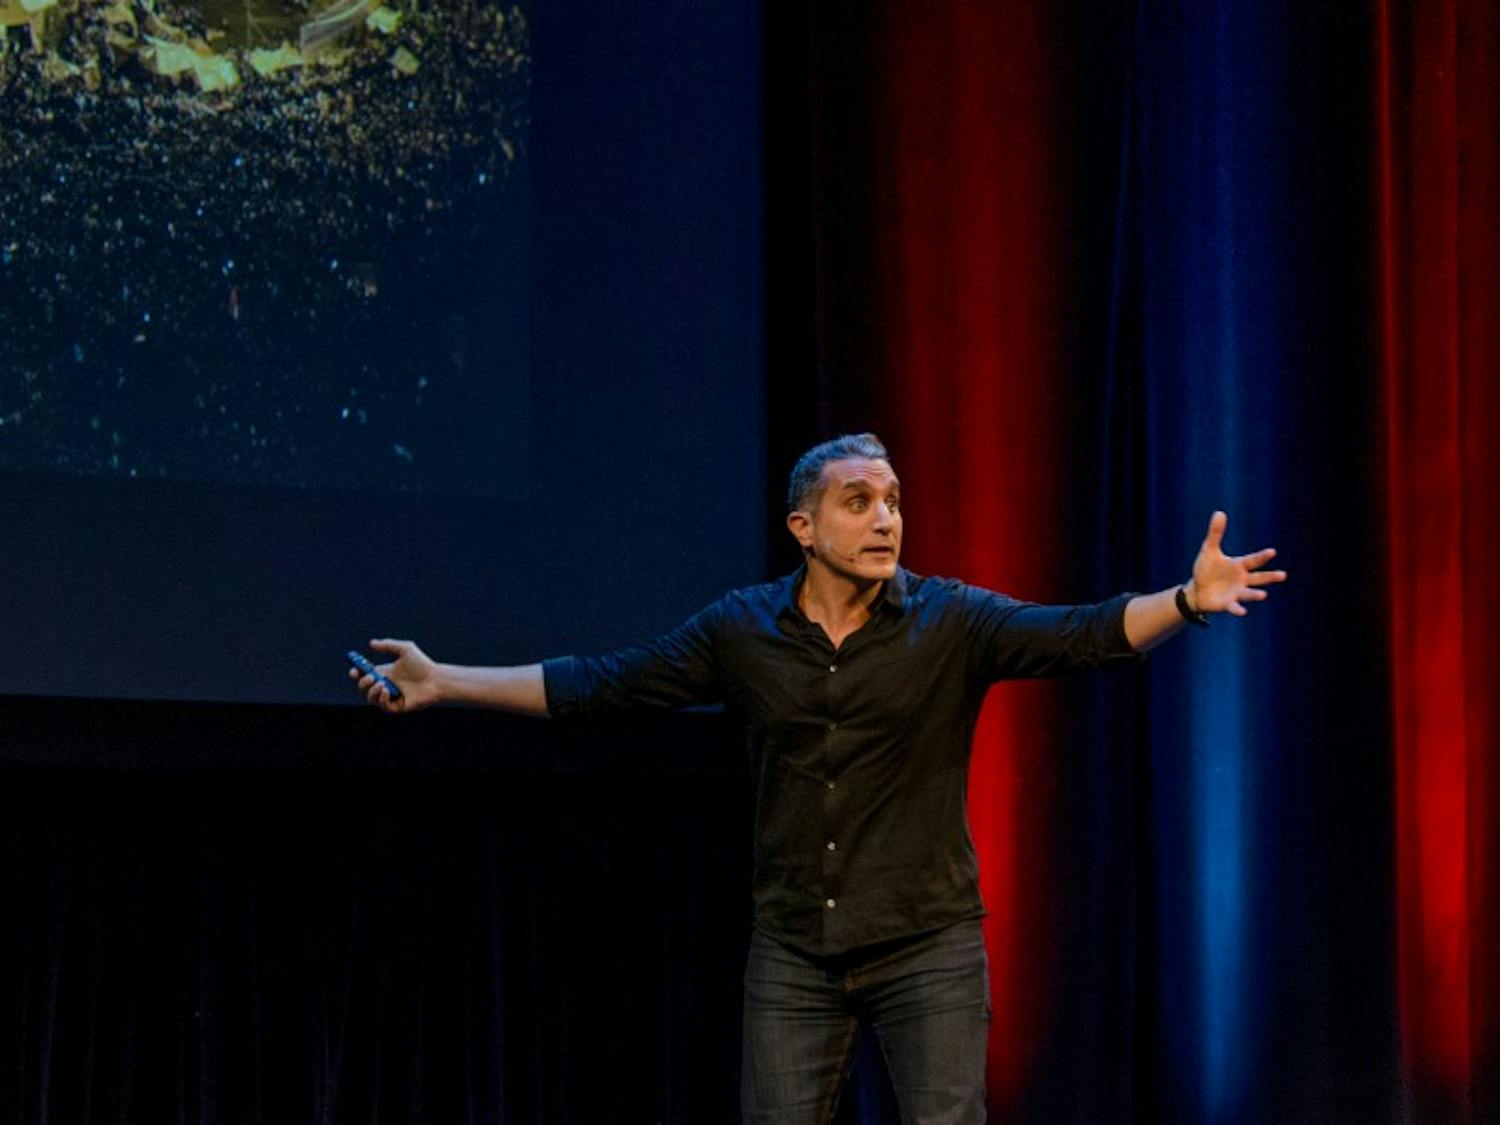 Bassem Youssef, an Egyptian satirist often compared to Jon Stewart, spoke at Memorial Union Wednesday night about the importance of satire.